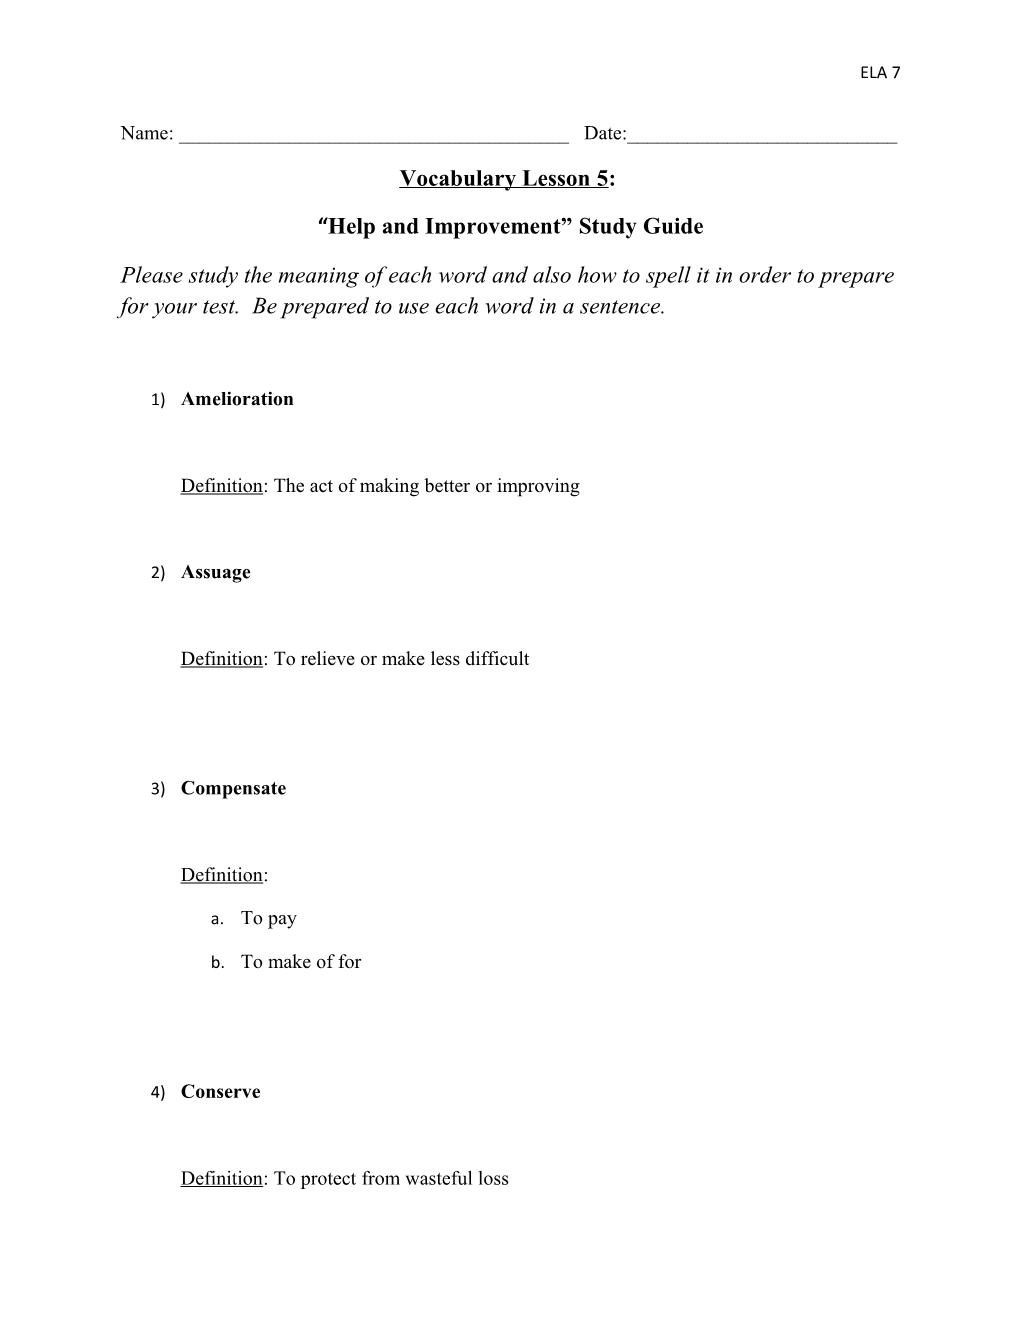 Help and Improvement Study Guide